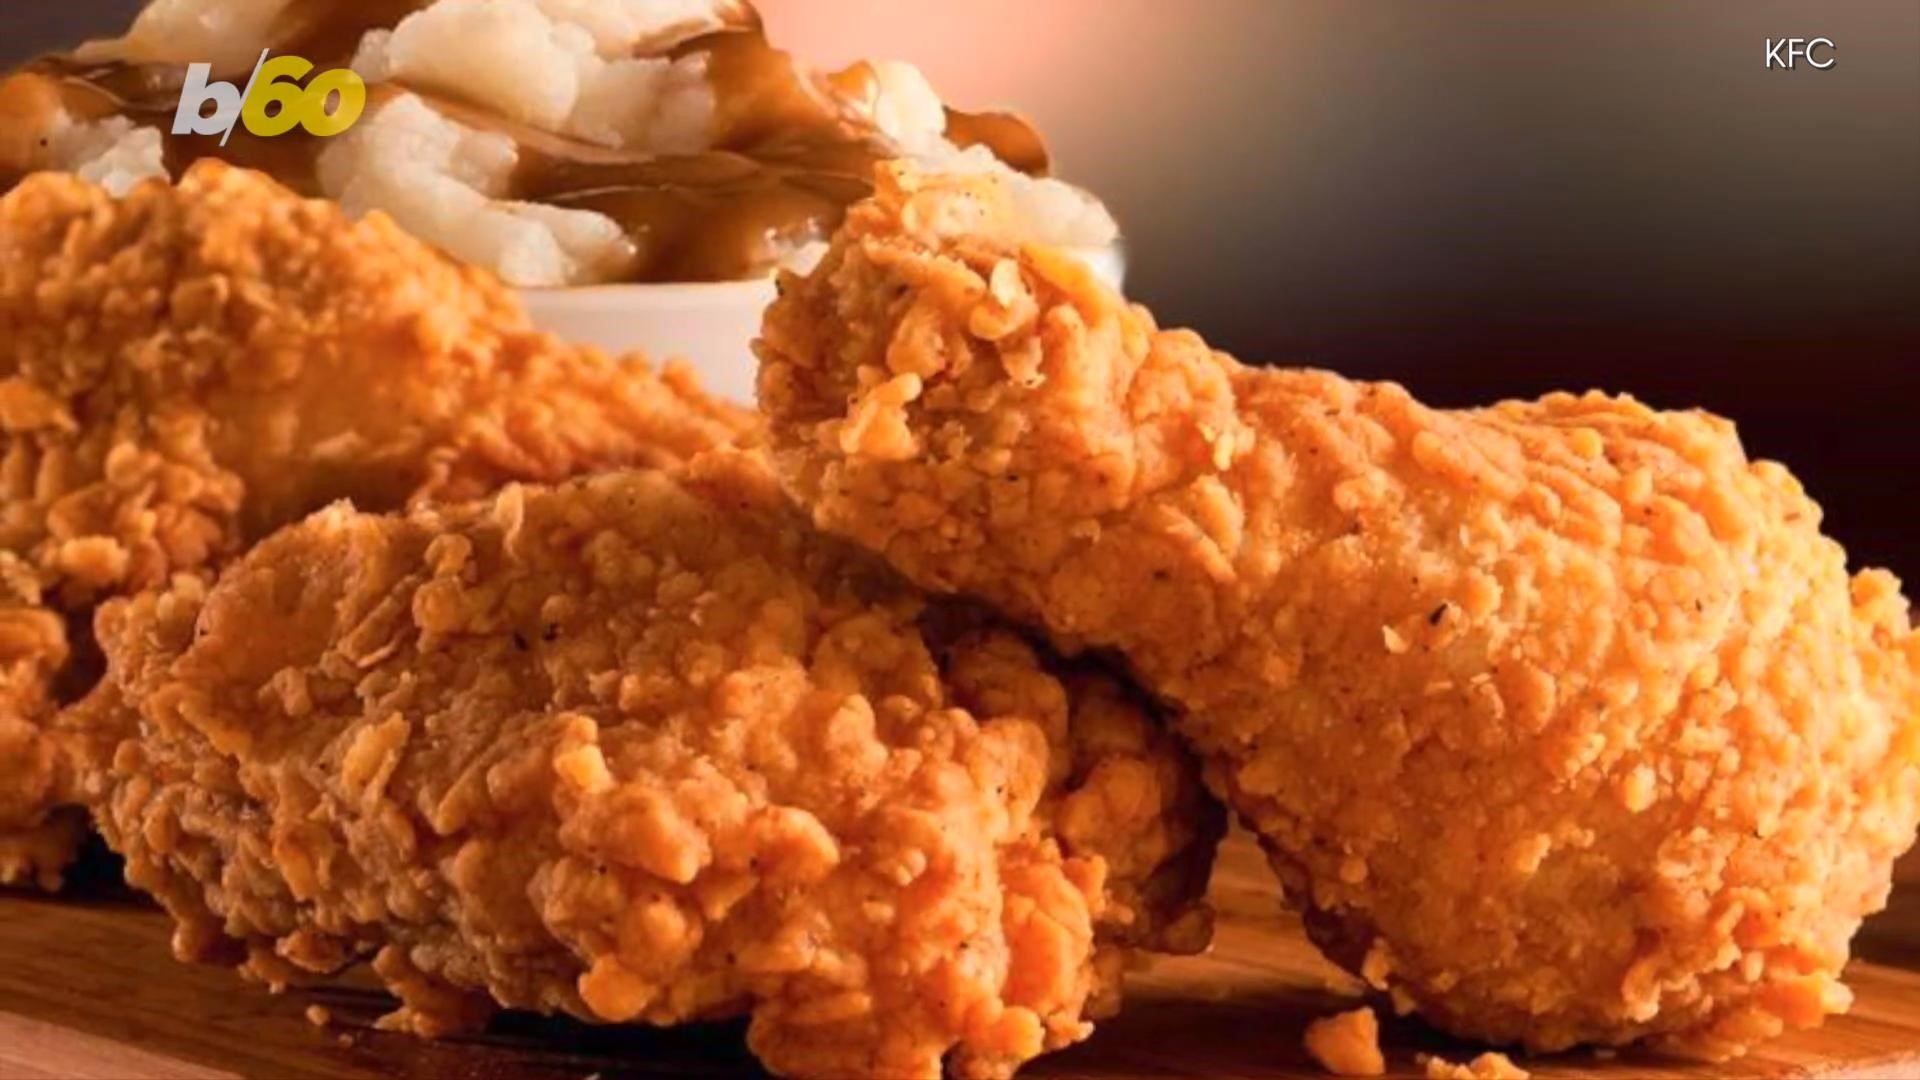 As part of a strategy to make its menu healthier, KFC will begin selling meat-free 'chicken' in 2019.